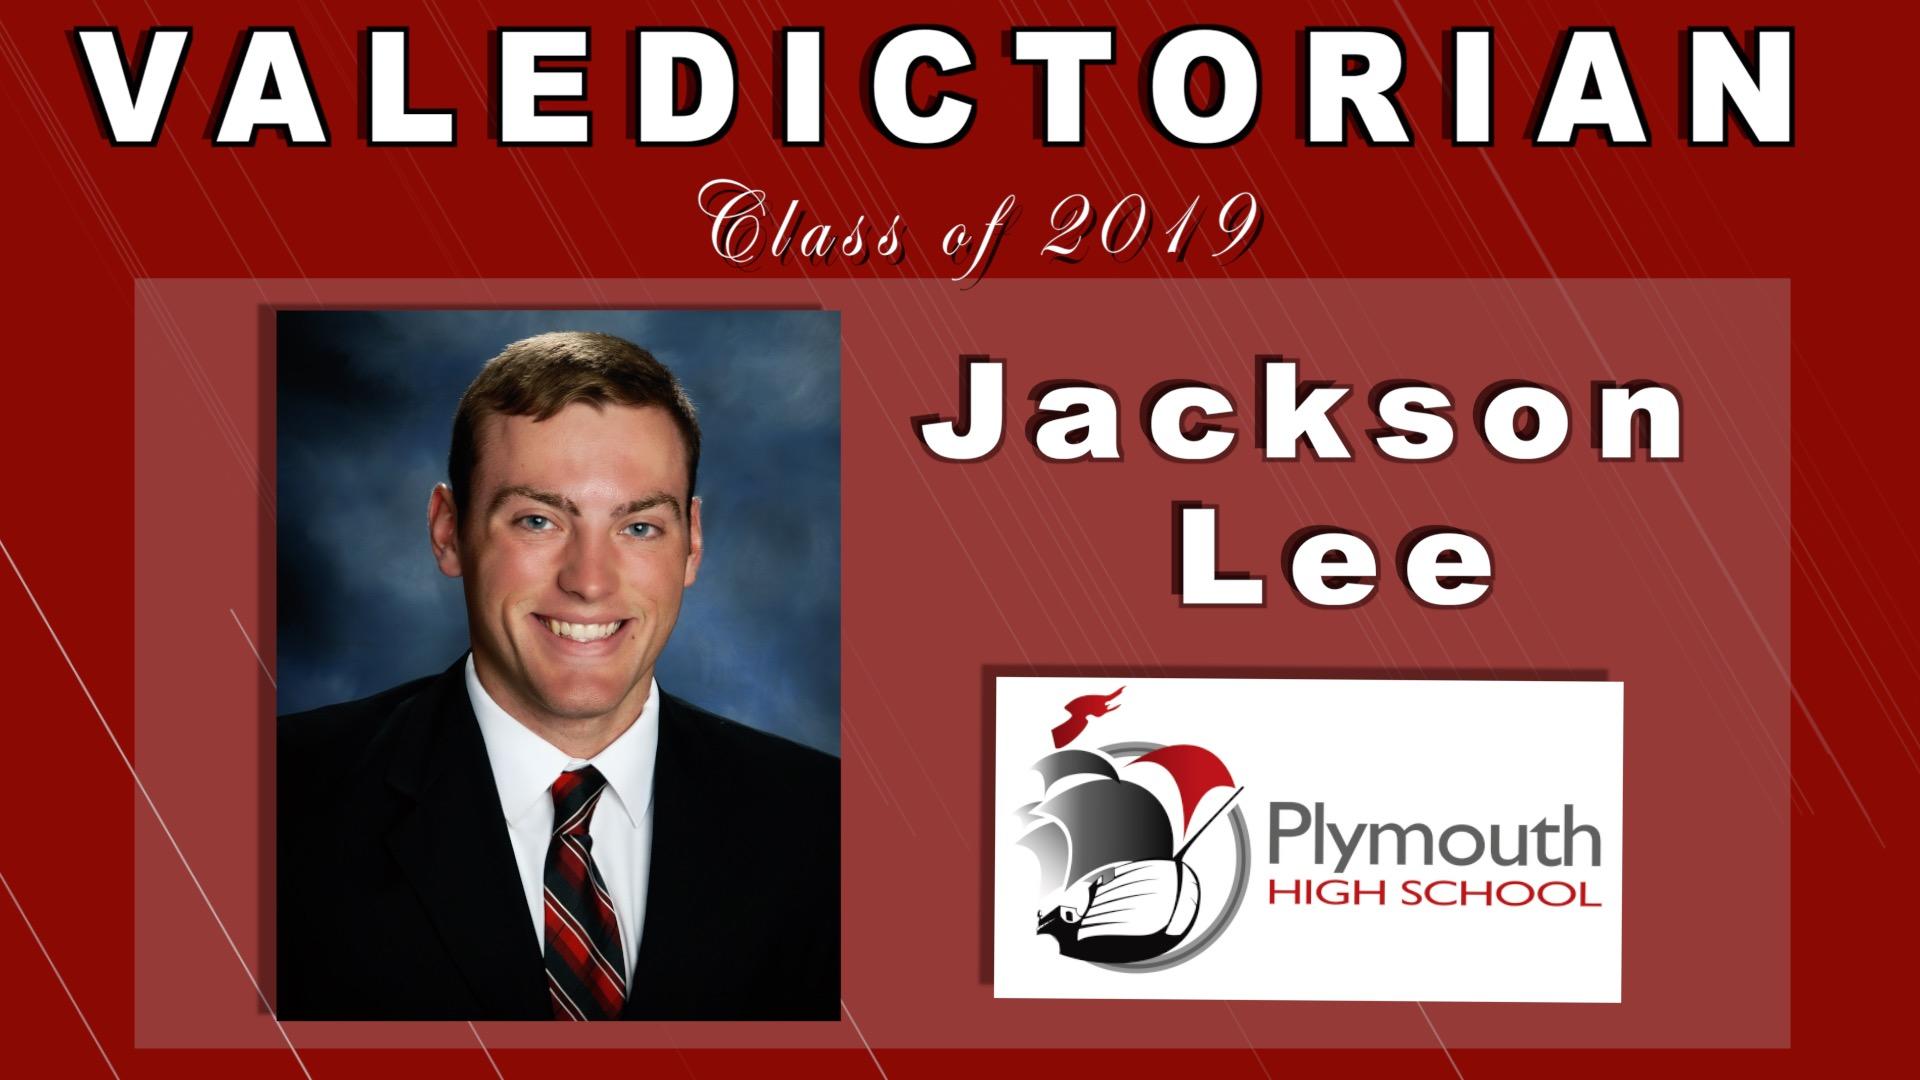 VALEDICTORIAN - Class of 2019 Jackson Lee with photo and Plymouth High School logo